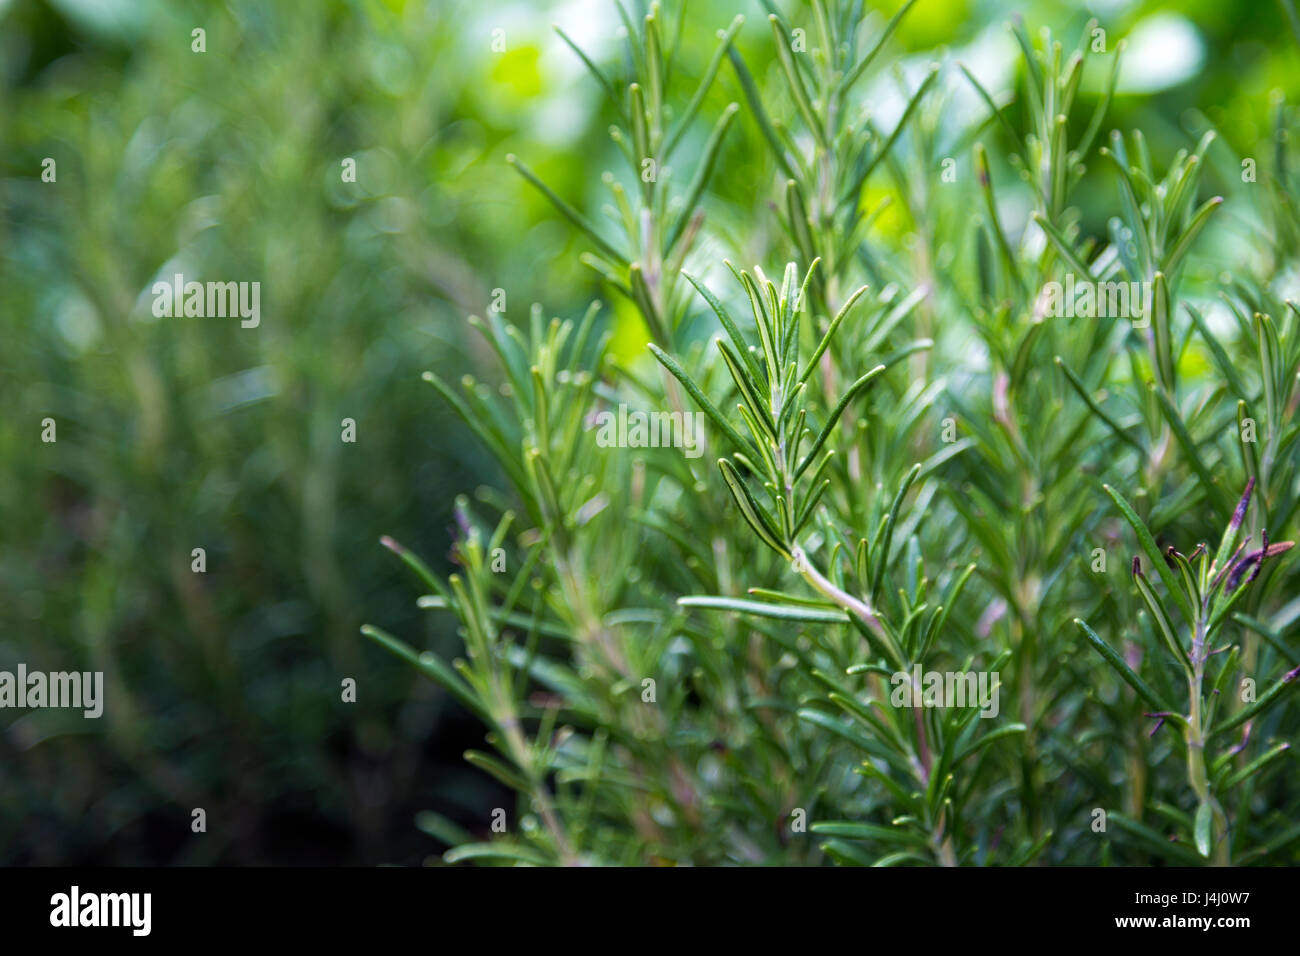 Rosemary (Rosmarinus officinalis) plant growing in a garden Stock Photo